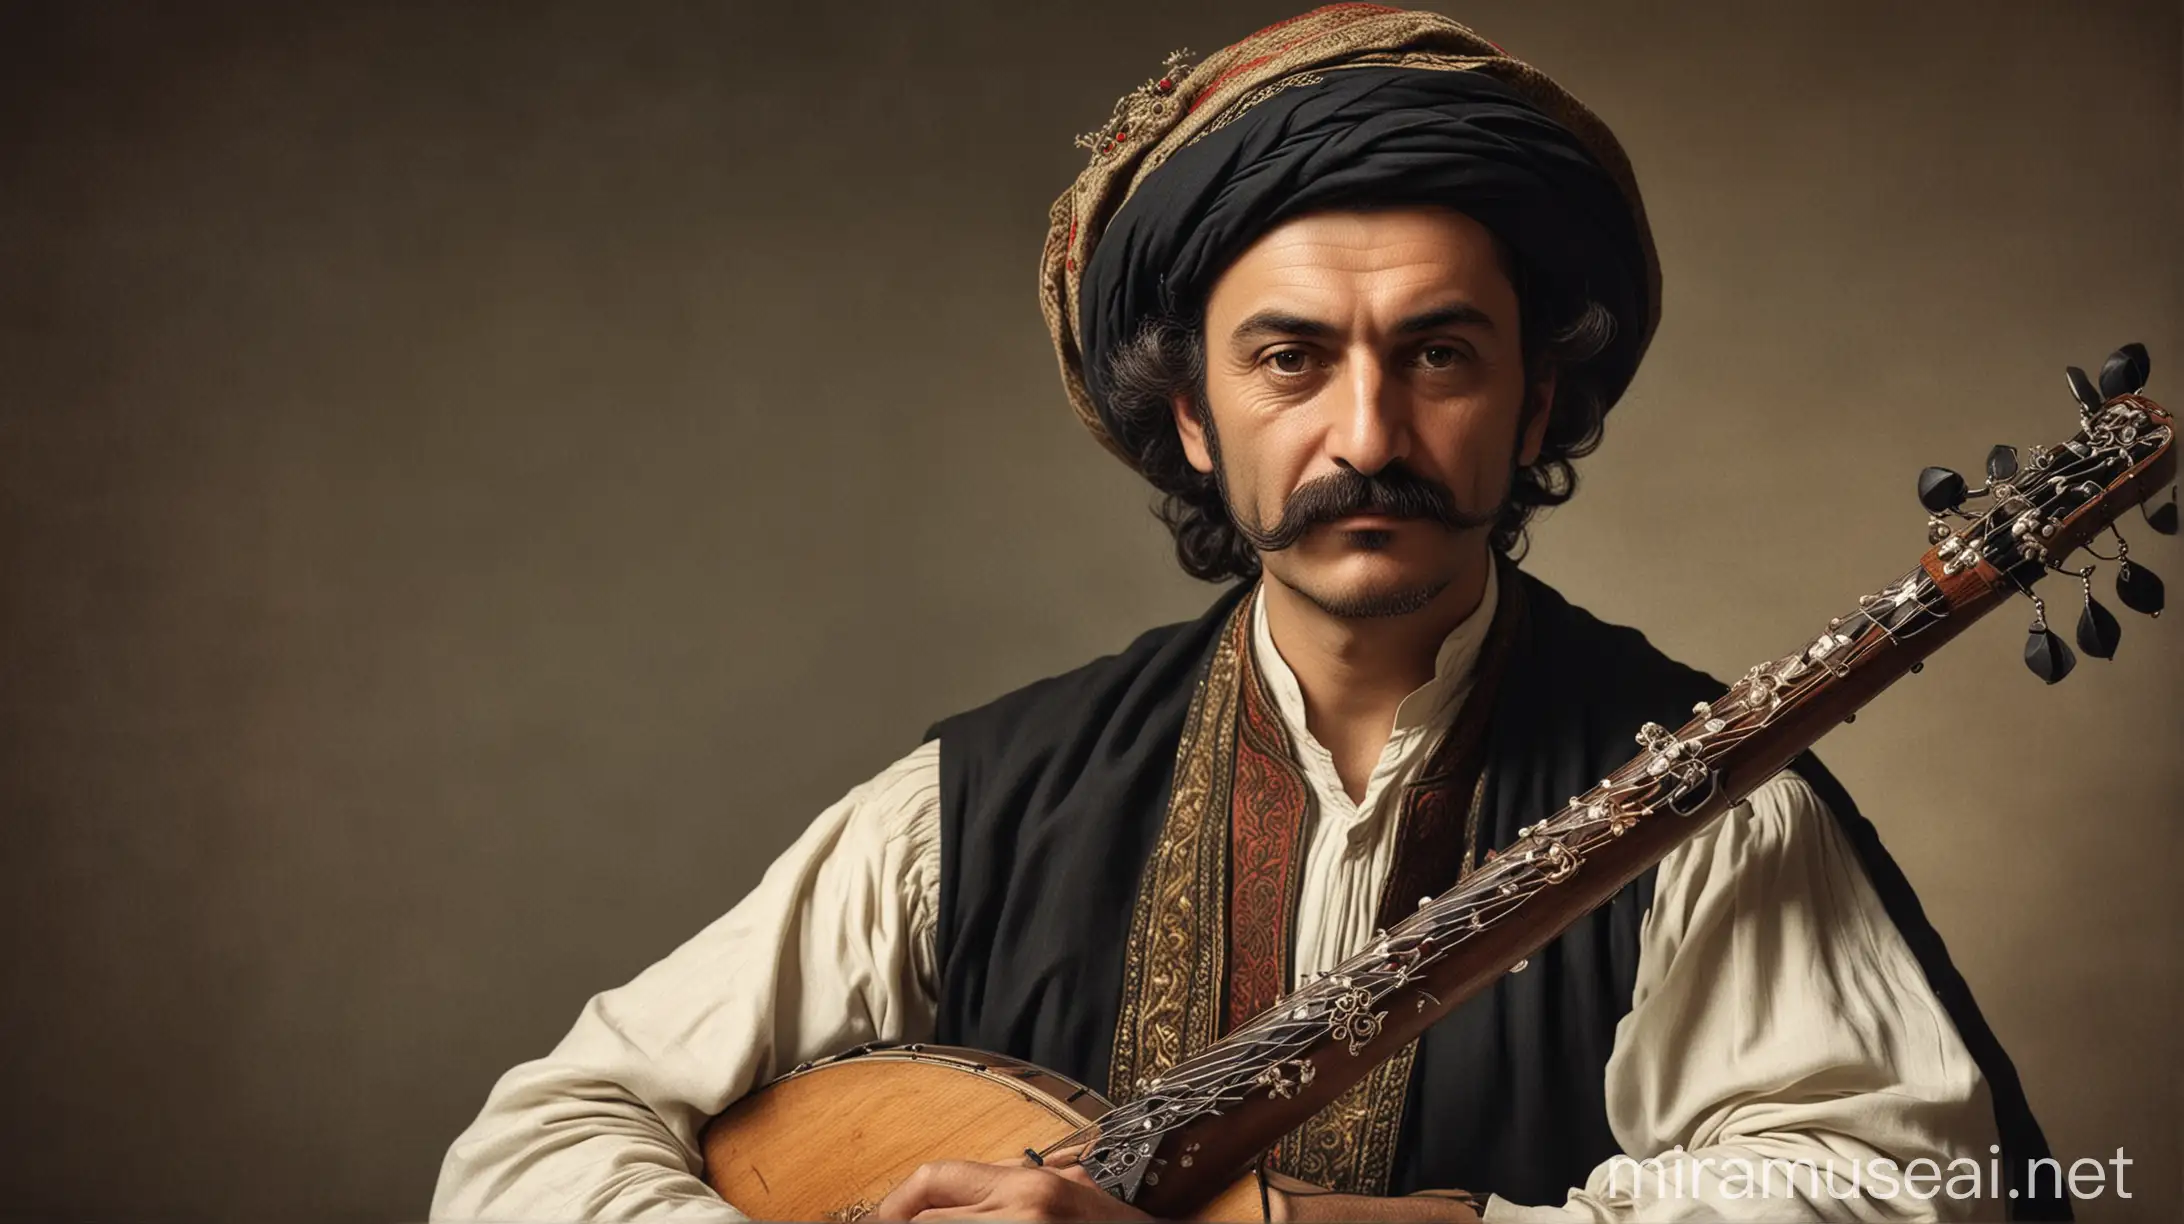 A Turkish poet of the 17th century with a scalpel mustache and a Turkish saz in his hand.